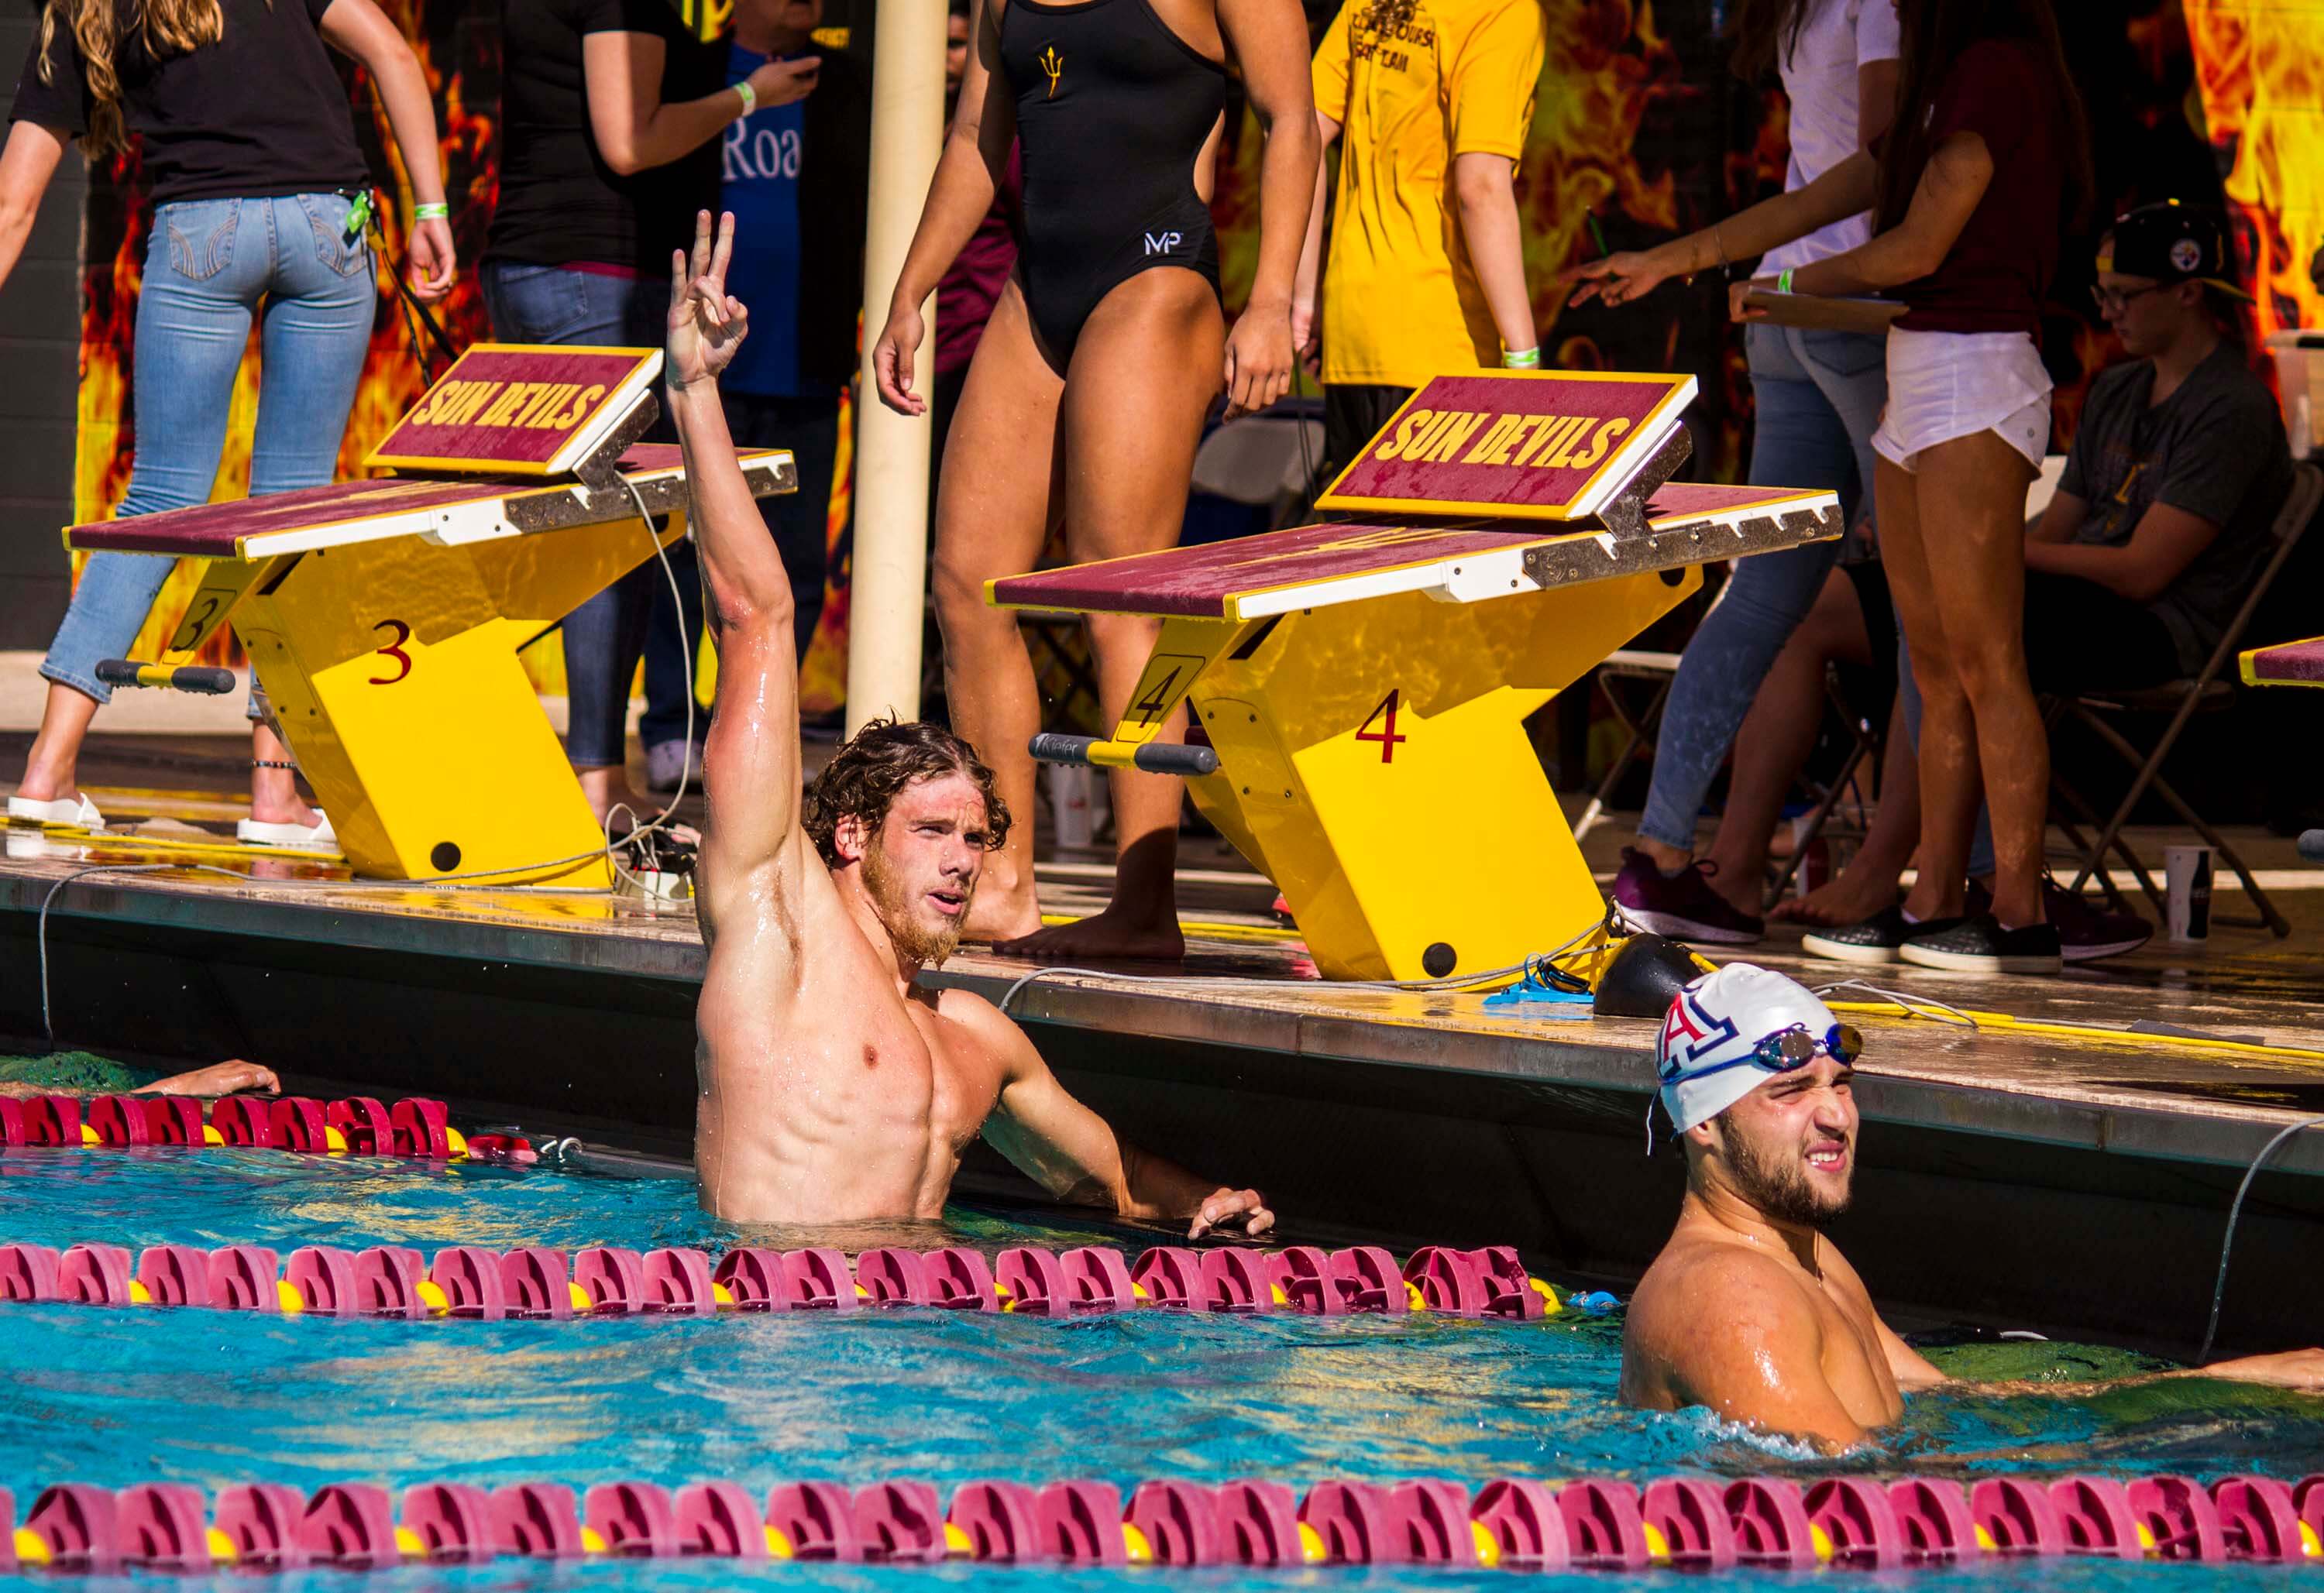 Arizona State University sophomore Cameron Craig rasies a fork after dominating the 200 yard freestyle for ASU’s first individual victory of the day during of ASU’s dual meet victory over the No. 18 Arizona Wildcats at Mona Plummer Aquatic Center on Saturday, February 3, 2018 in Tempe, AZ. (Photo by Blake Benard)